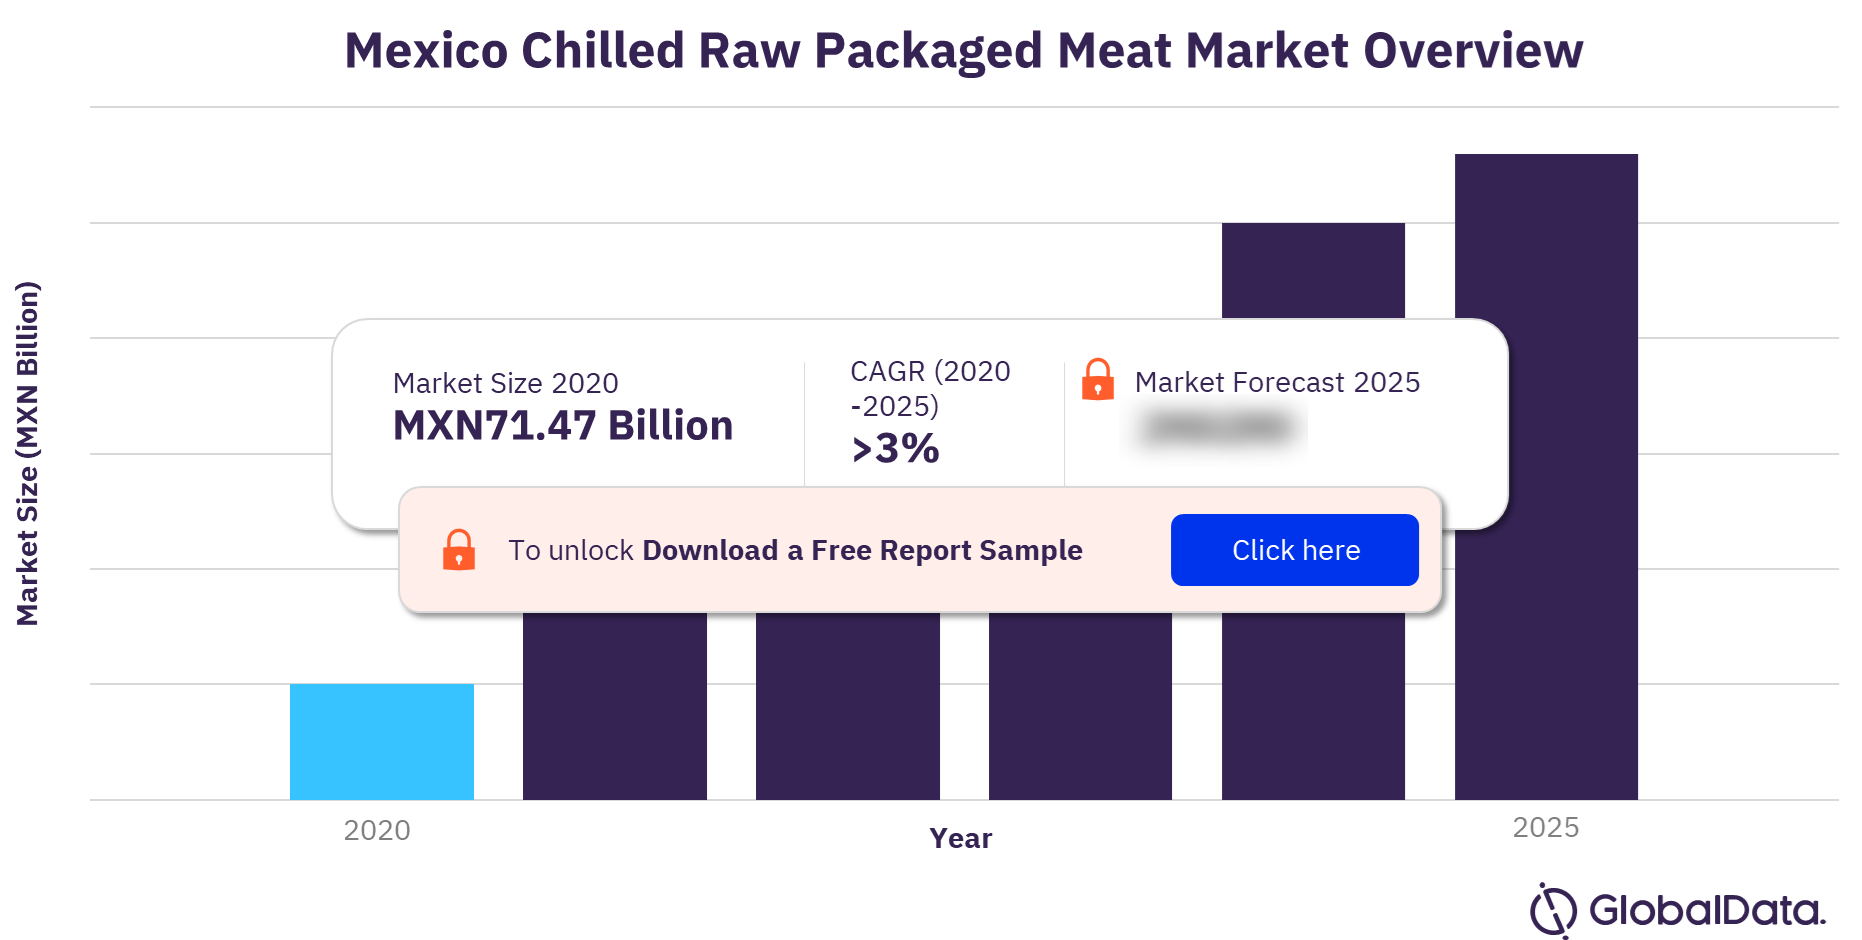 Mexico Chilled Raw Packaged Meat Market Outlook